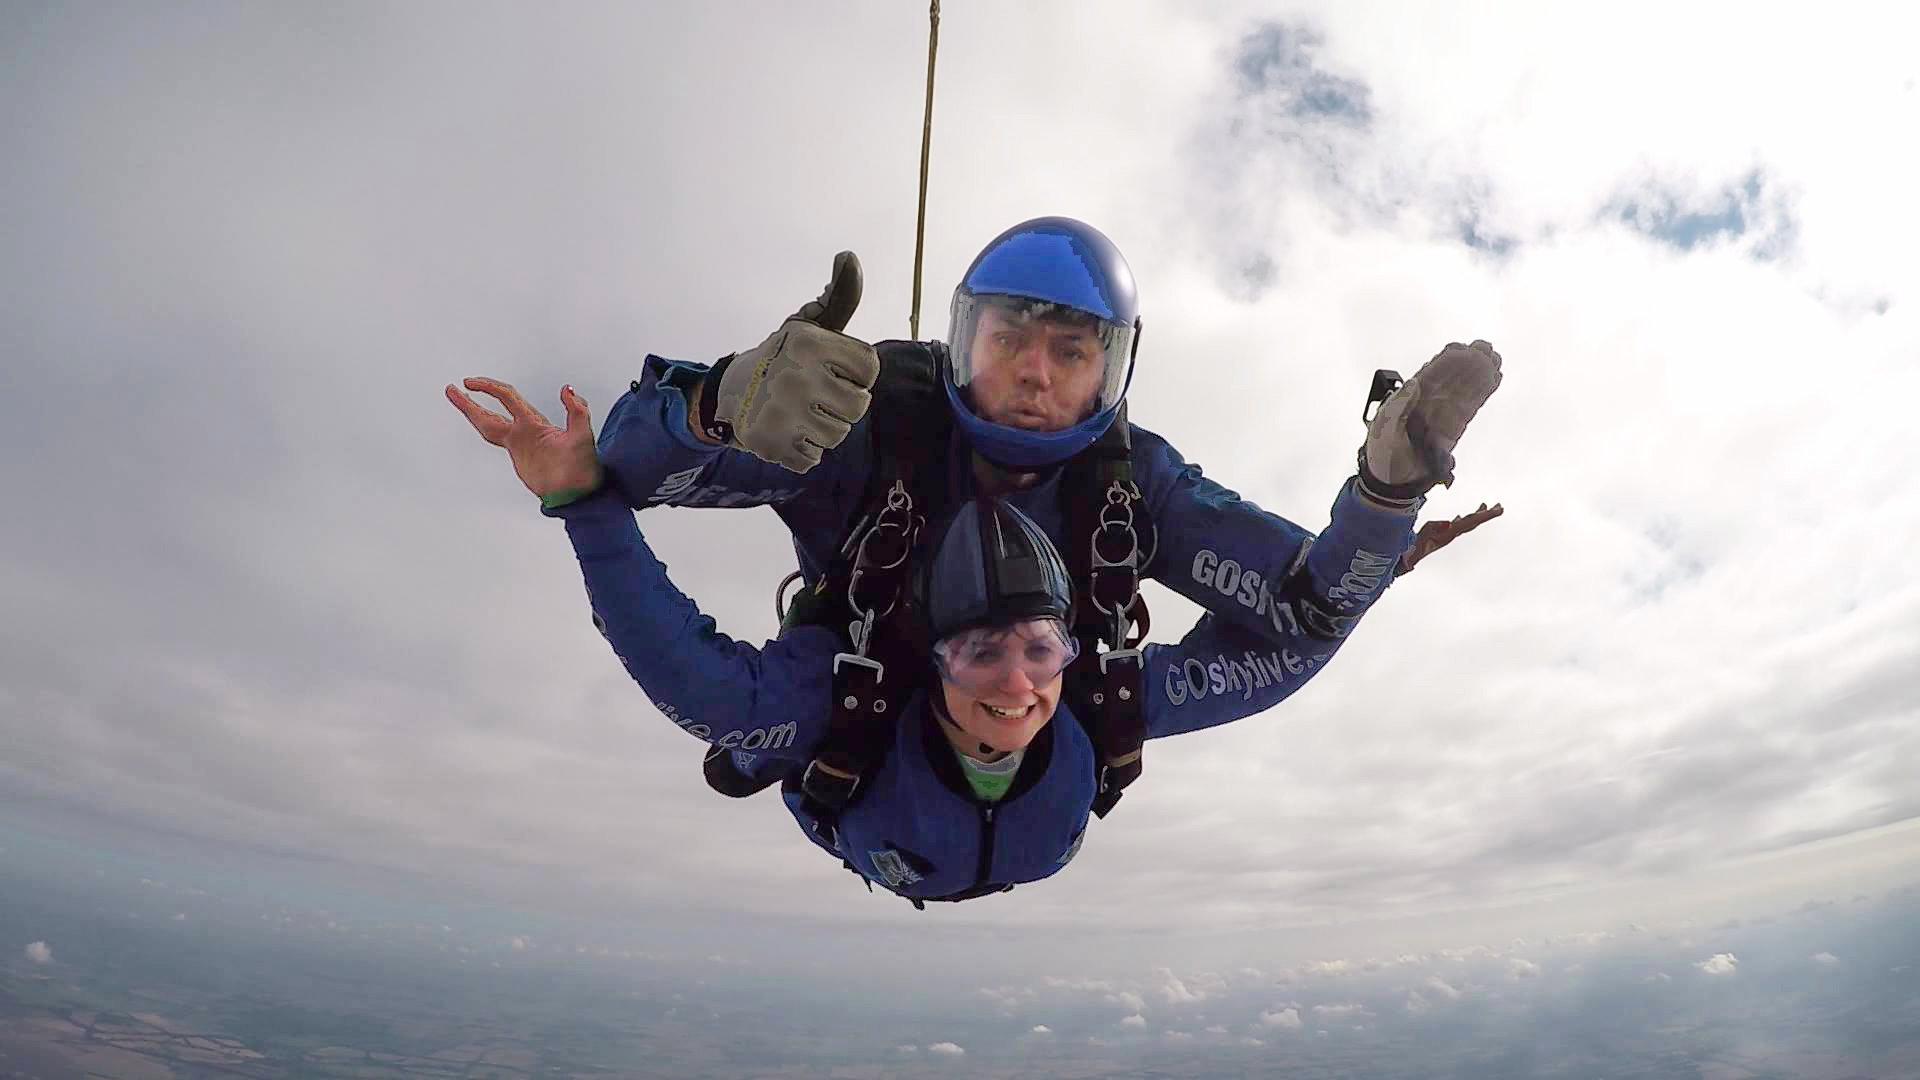 Skydiving to raise funds for the Enham Trust